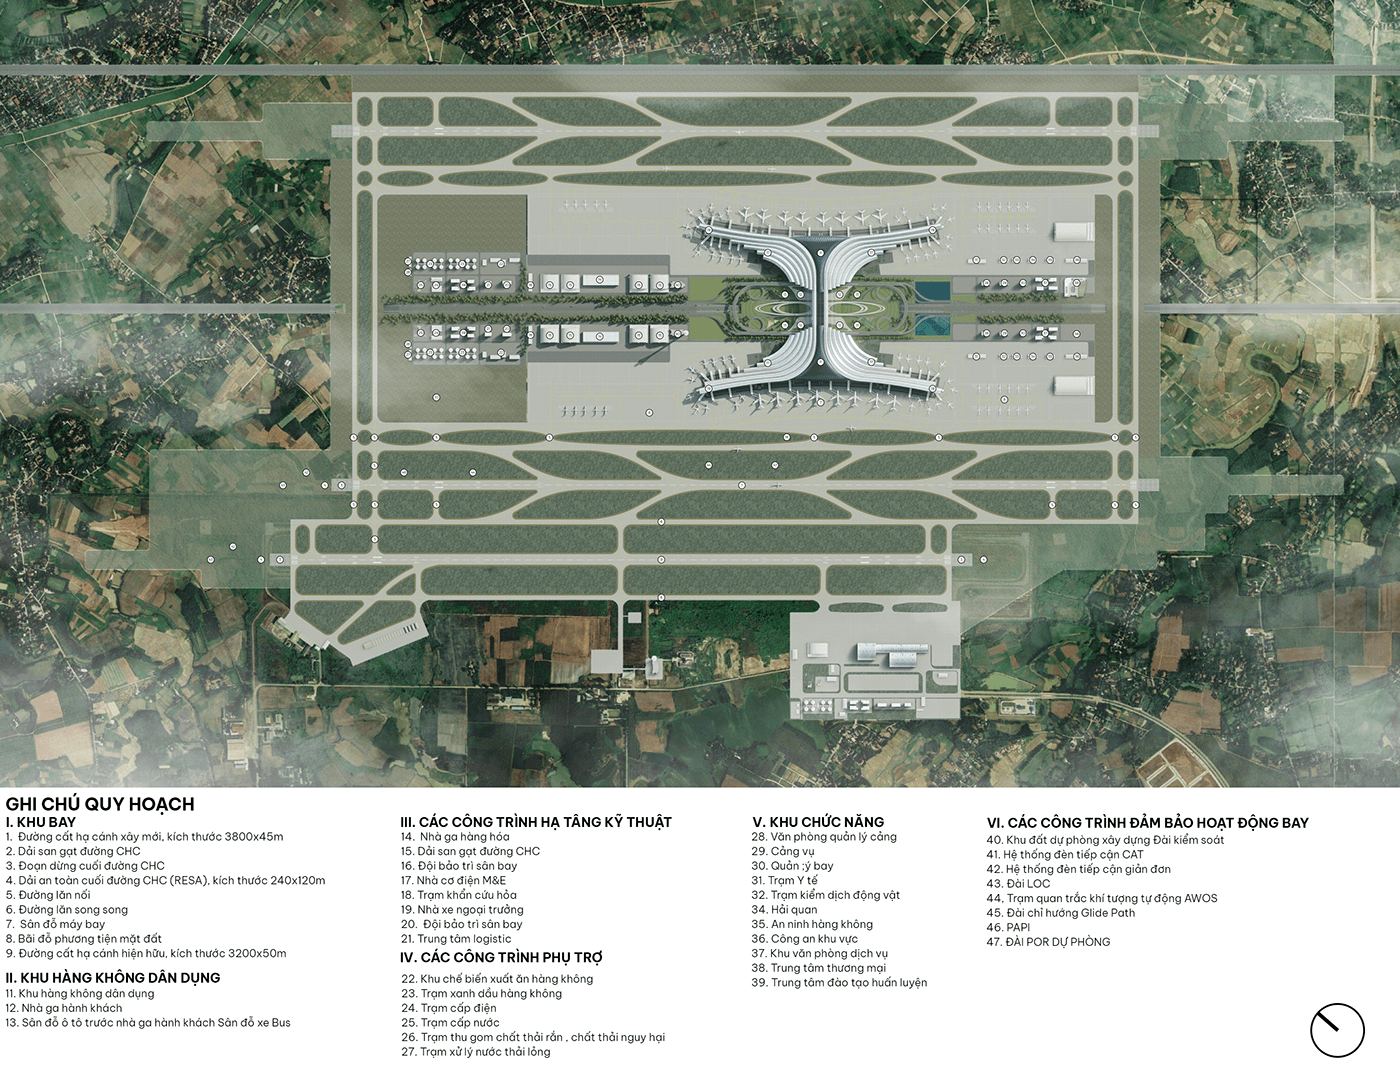 architecture thesis airport terminal airplane airline plane aviation International